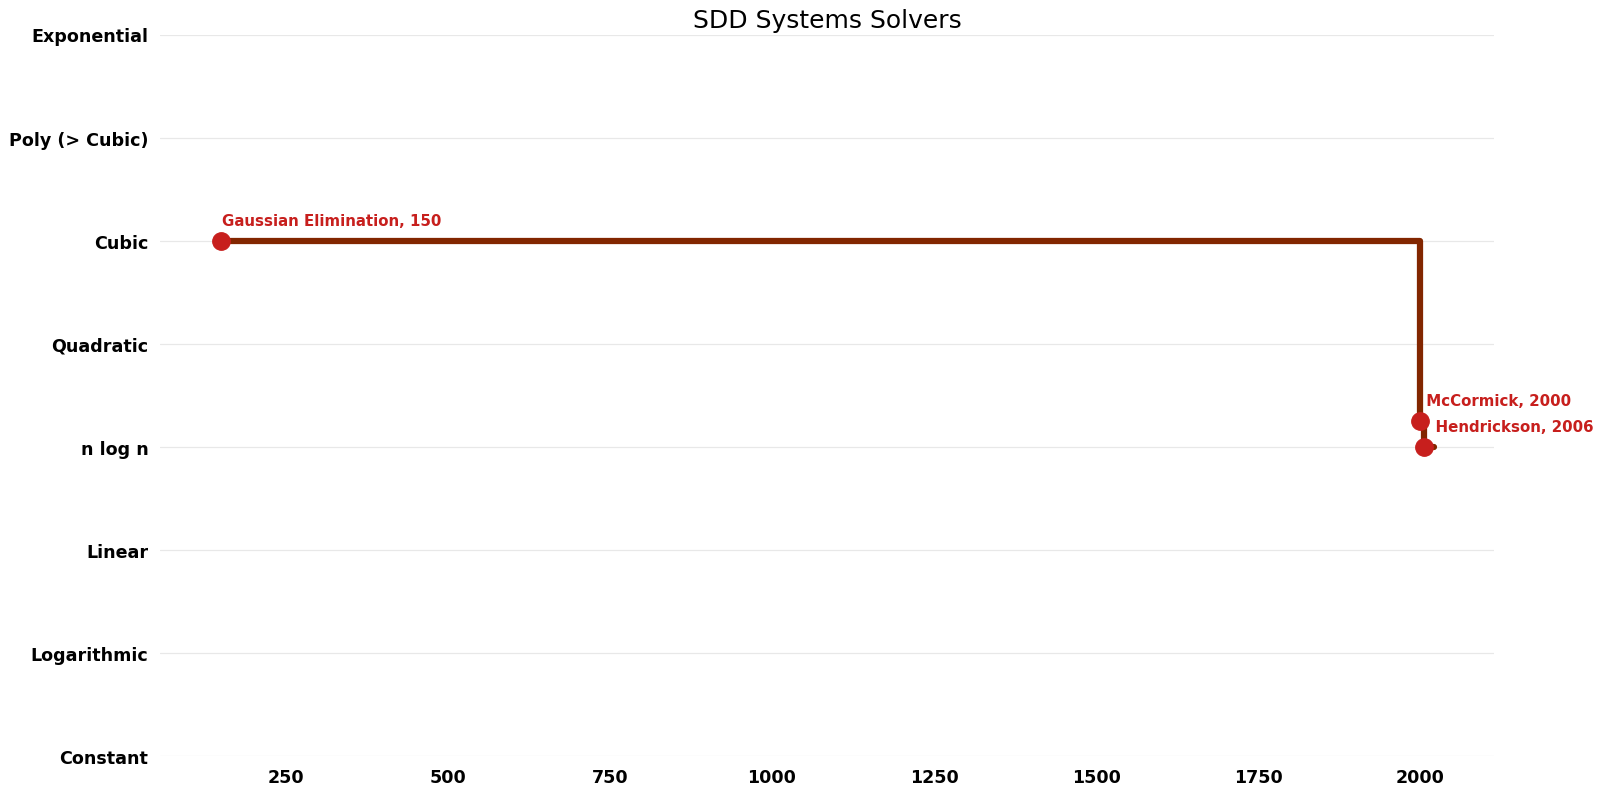 SDD Systems Solvers - Time.png